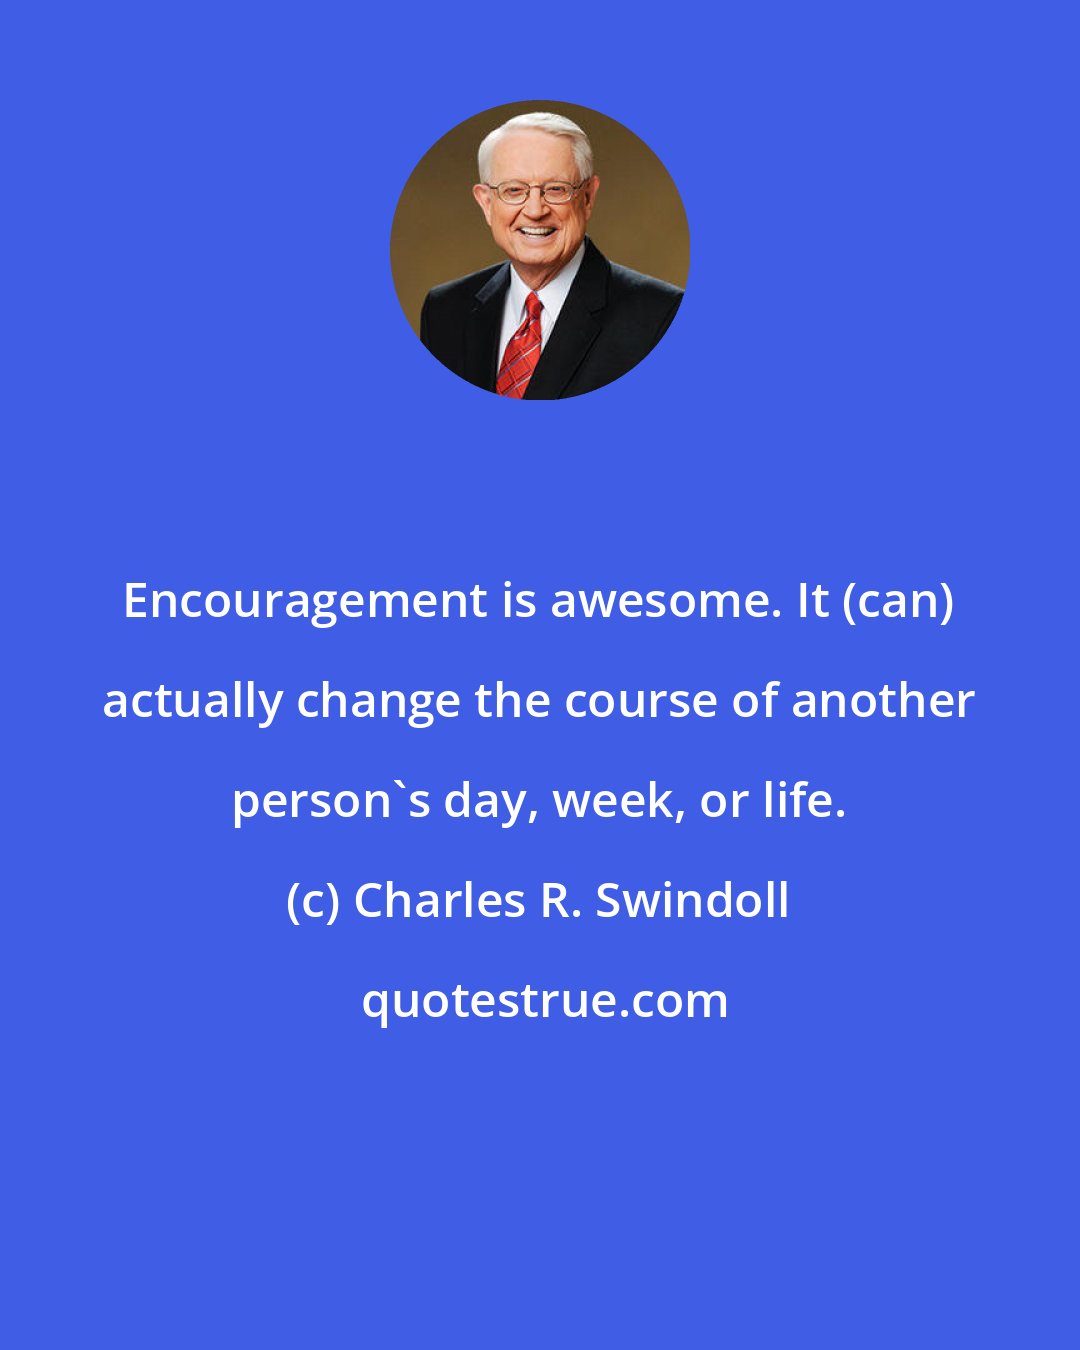 Charles R. Swindoll: Encouragement is awesome. It (can) actually change the course of another person's day, week, or life.